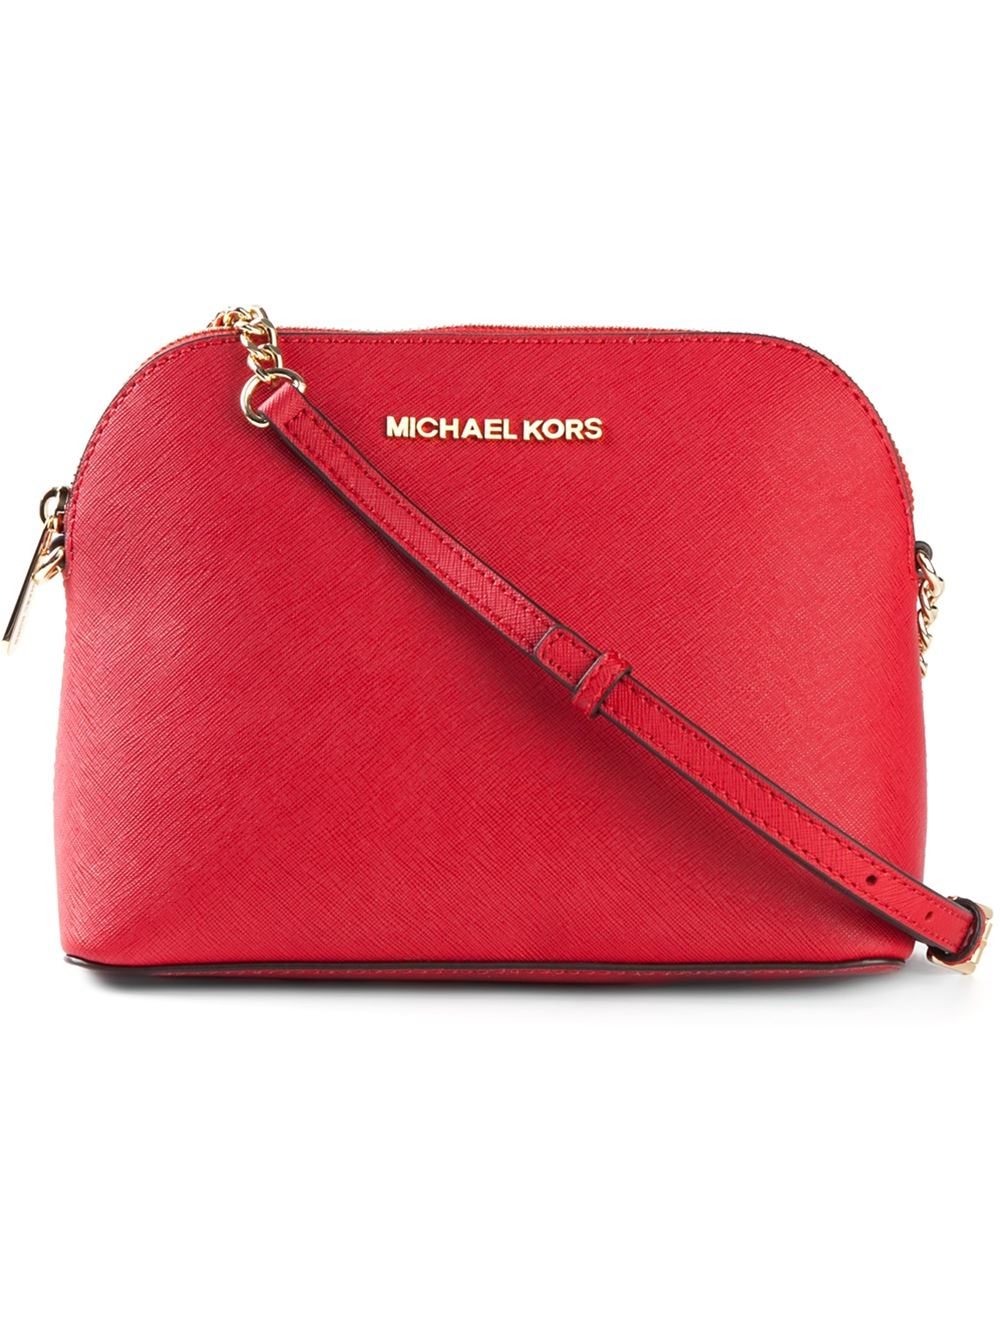 New With Tags Michael Kors Cindy Larger Dome Crossbody Bag